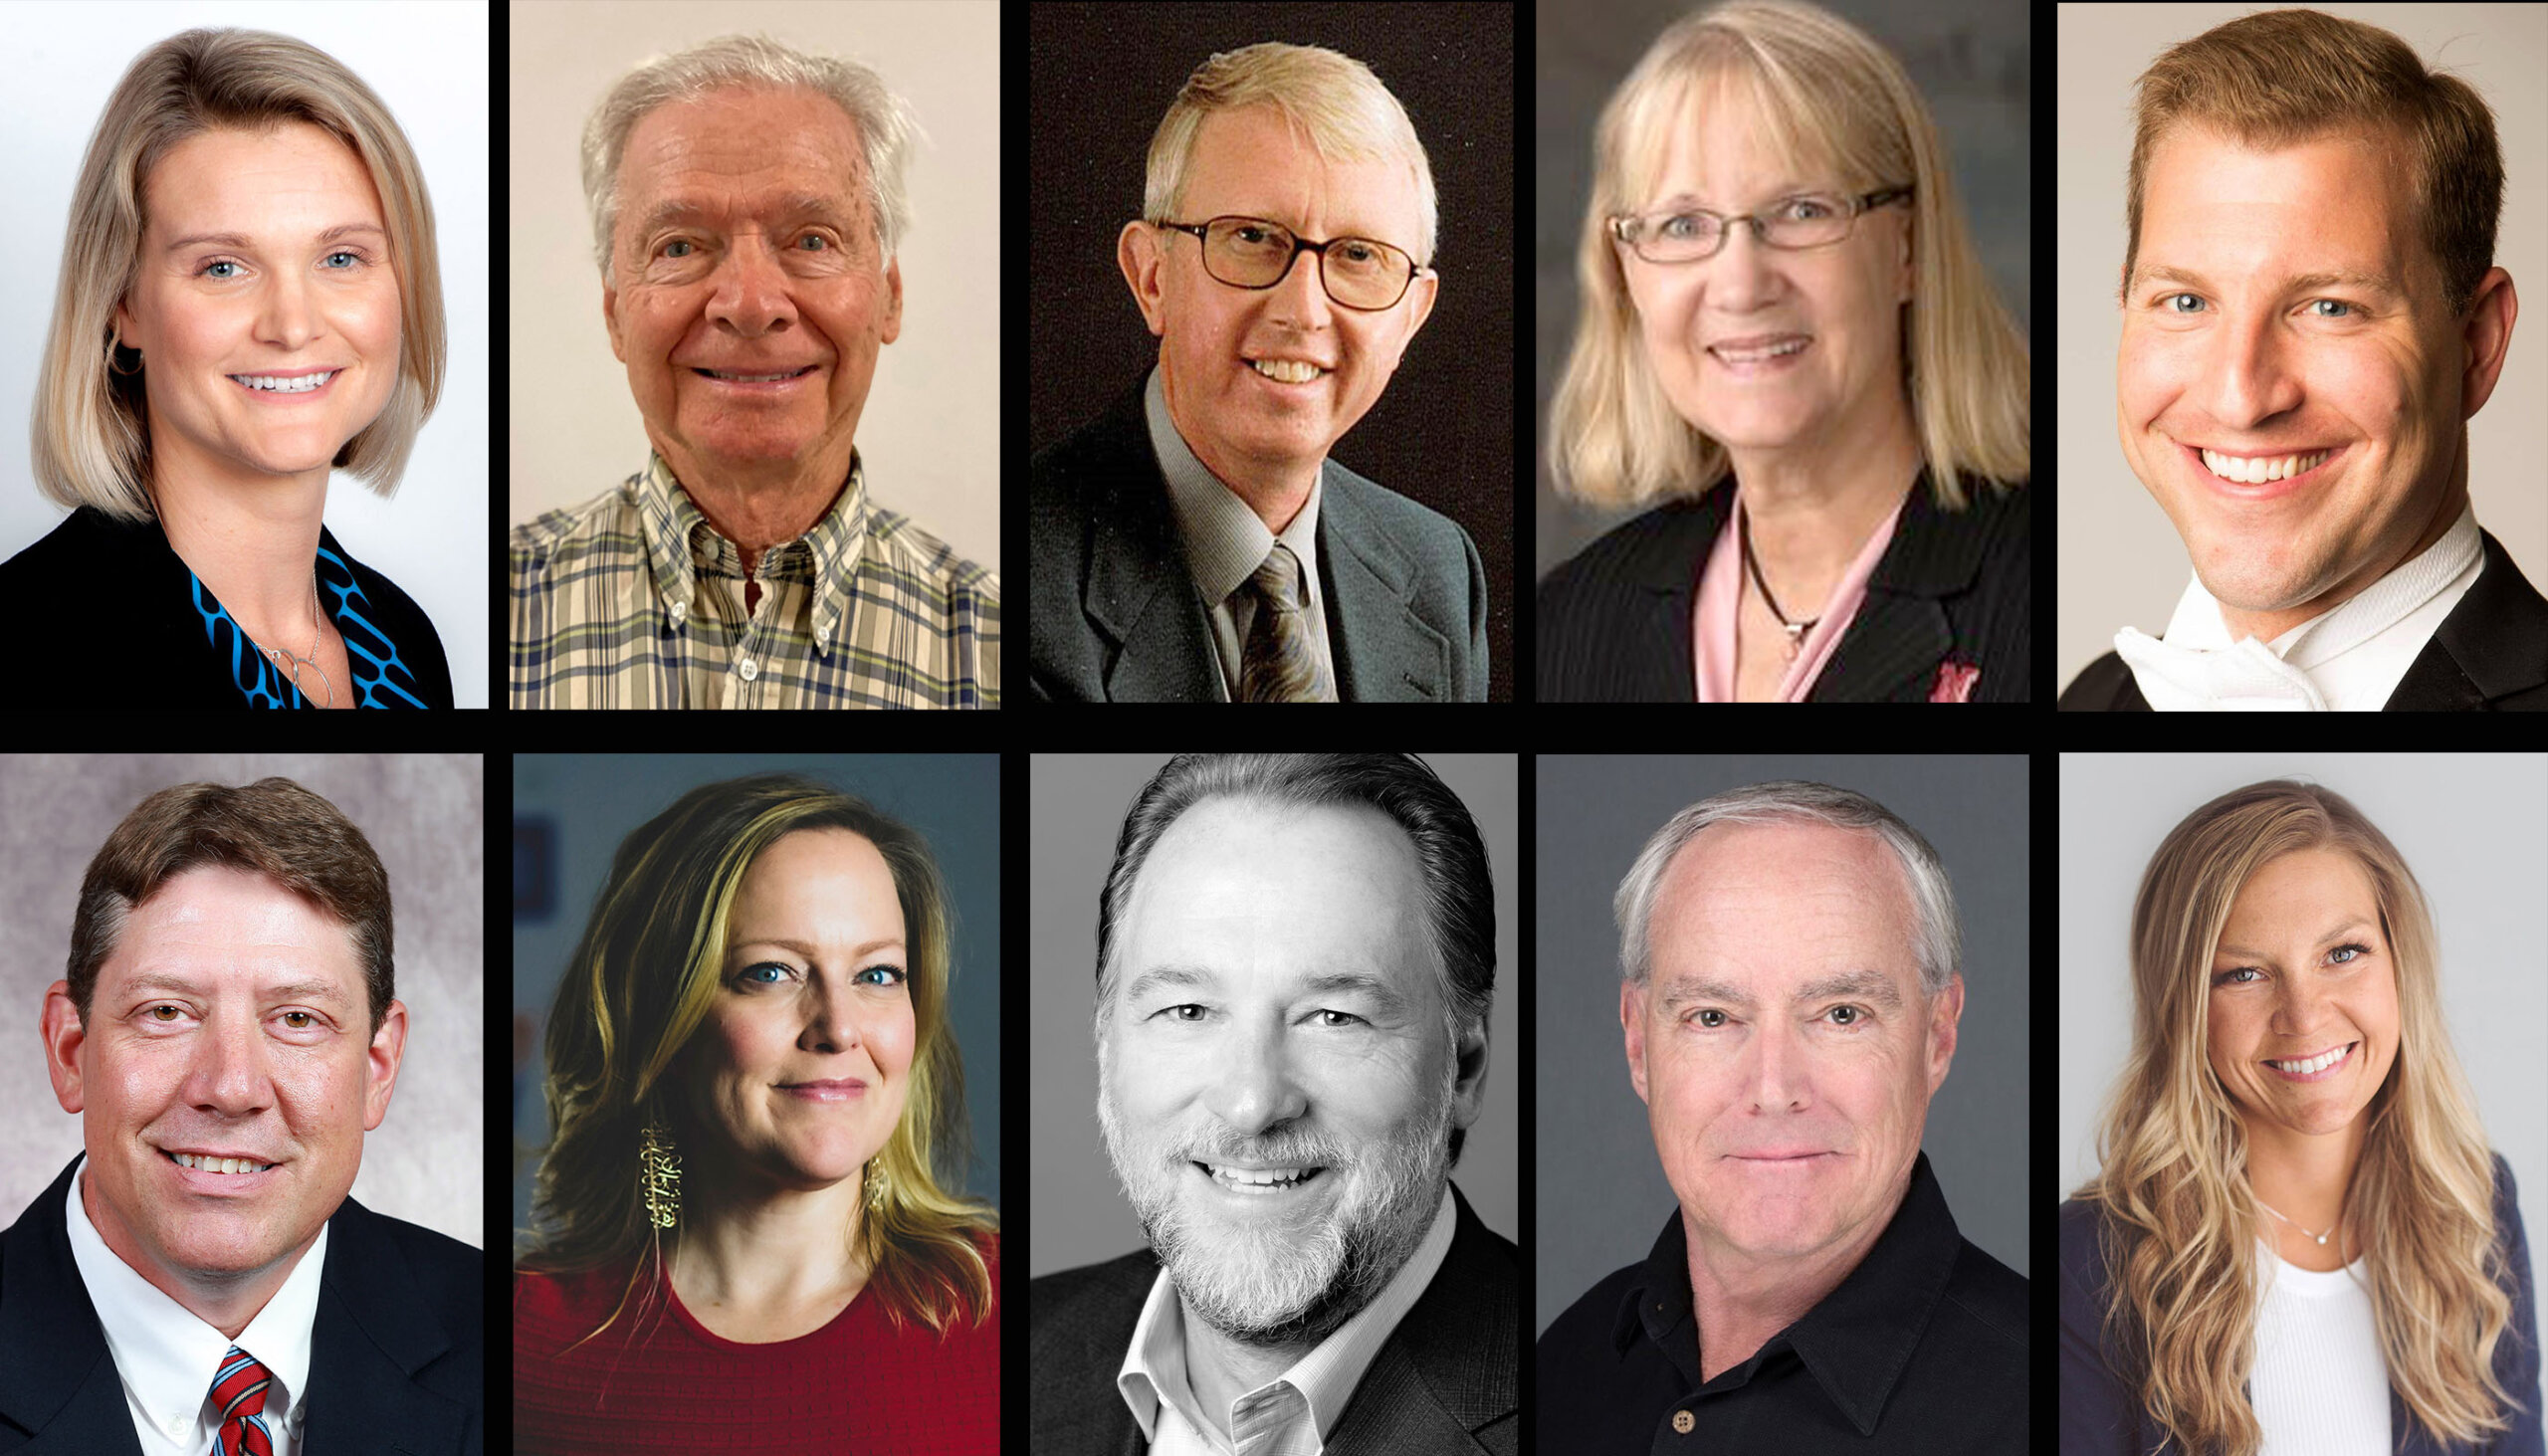 Ten UNK alumni to be honored during homecoming festivities